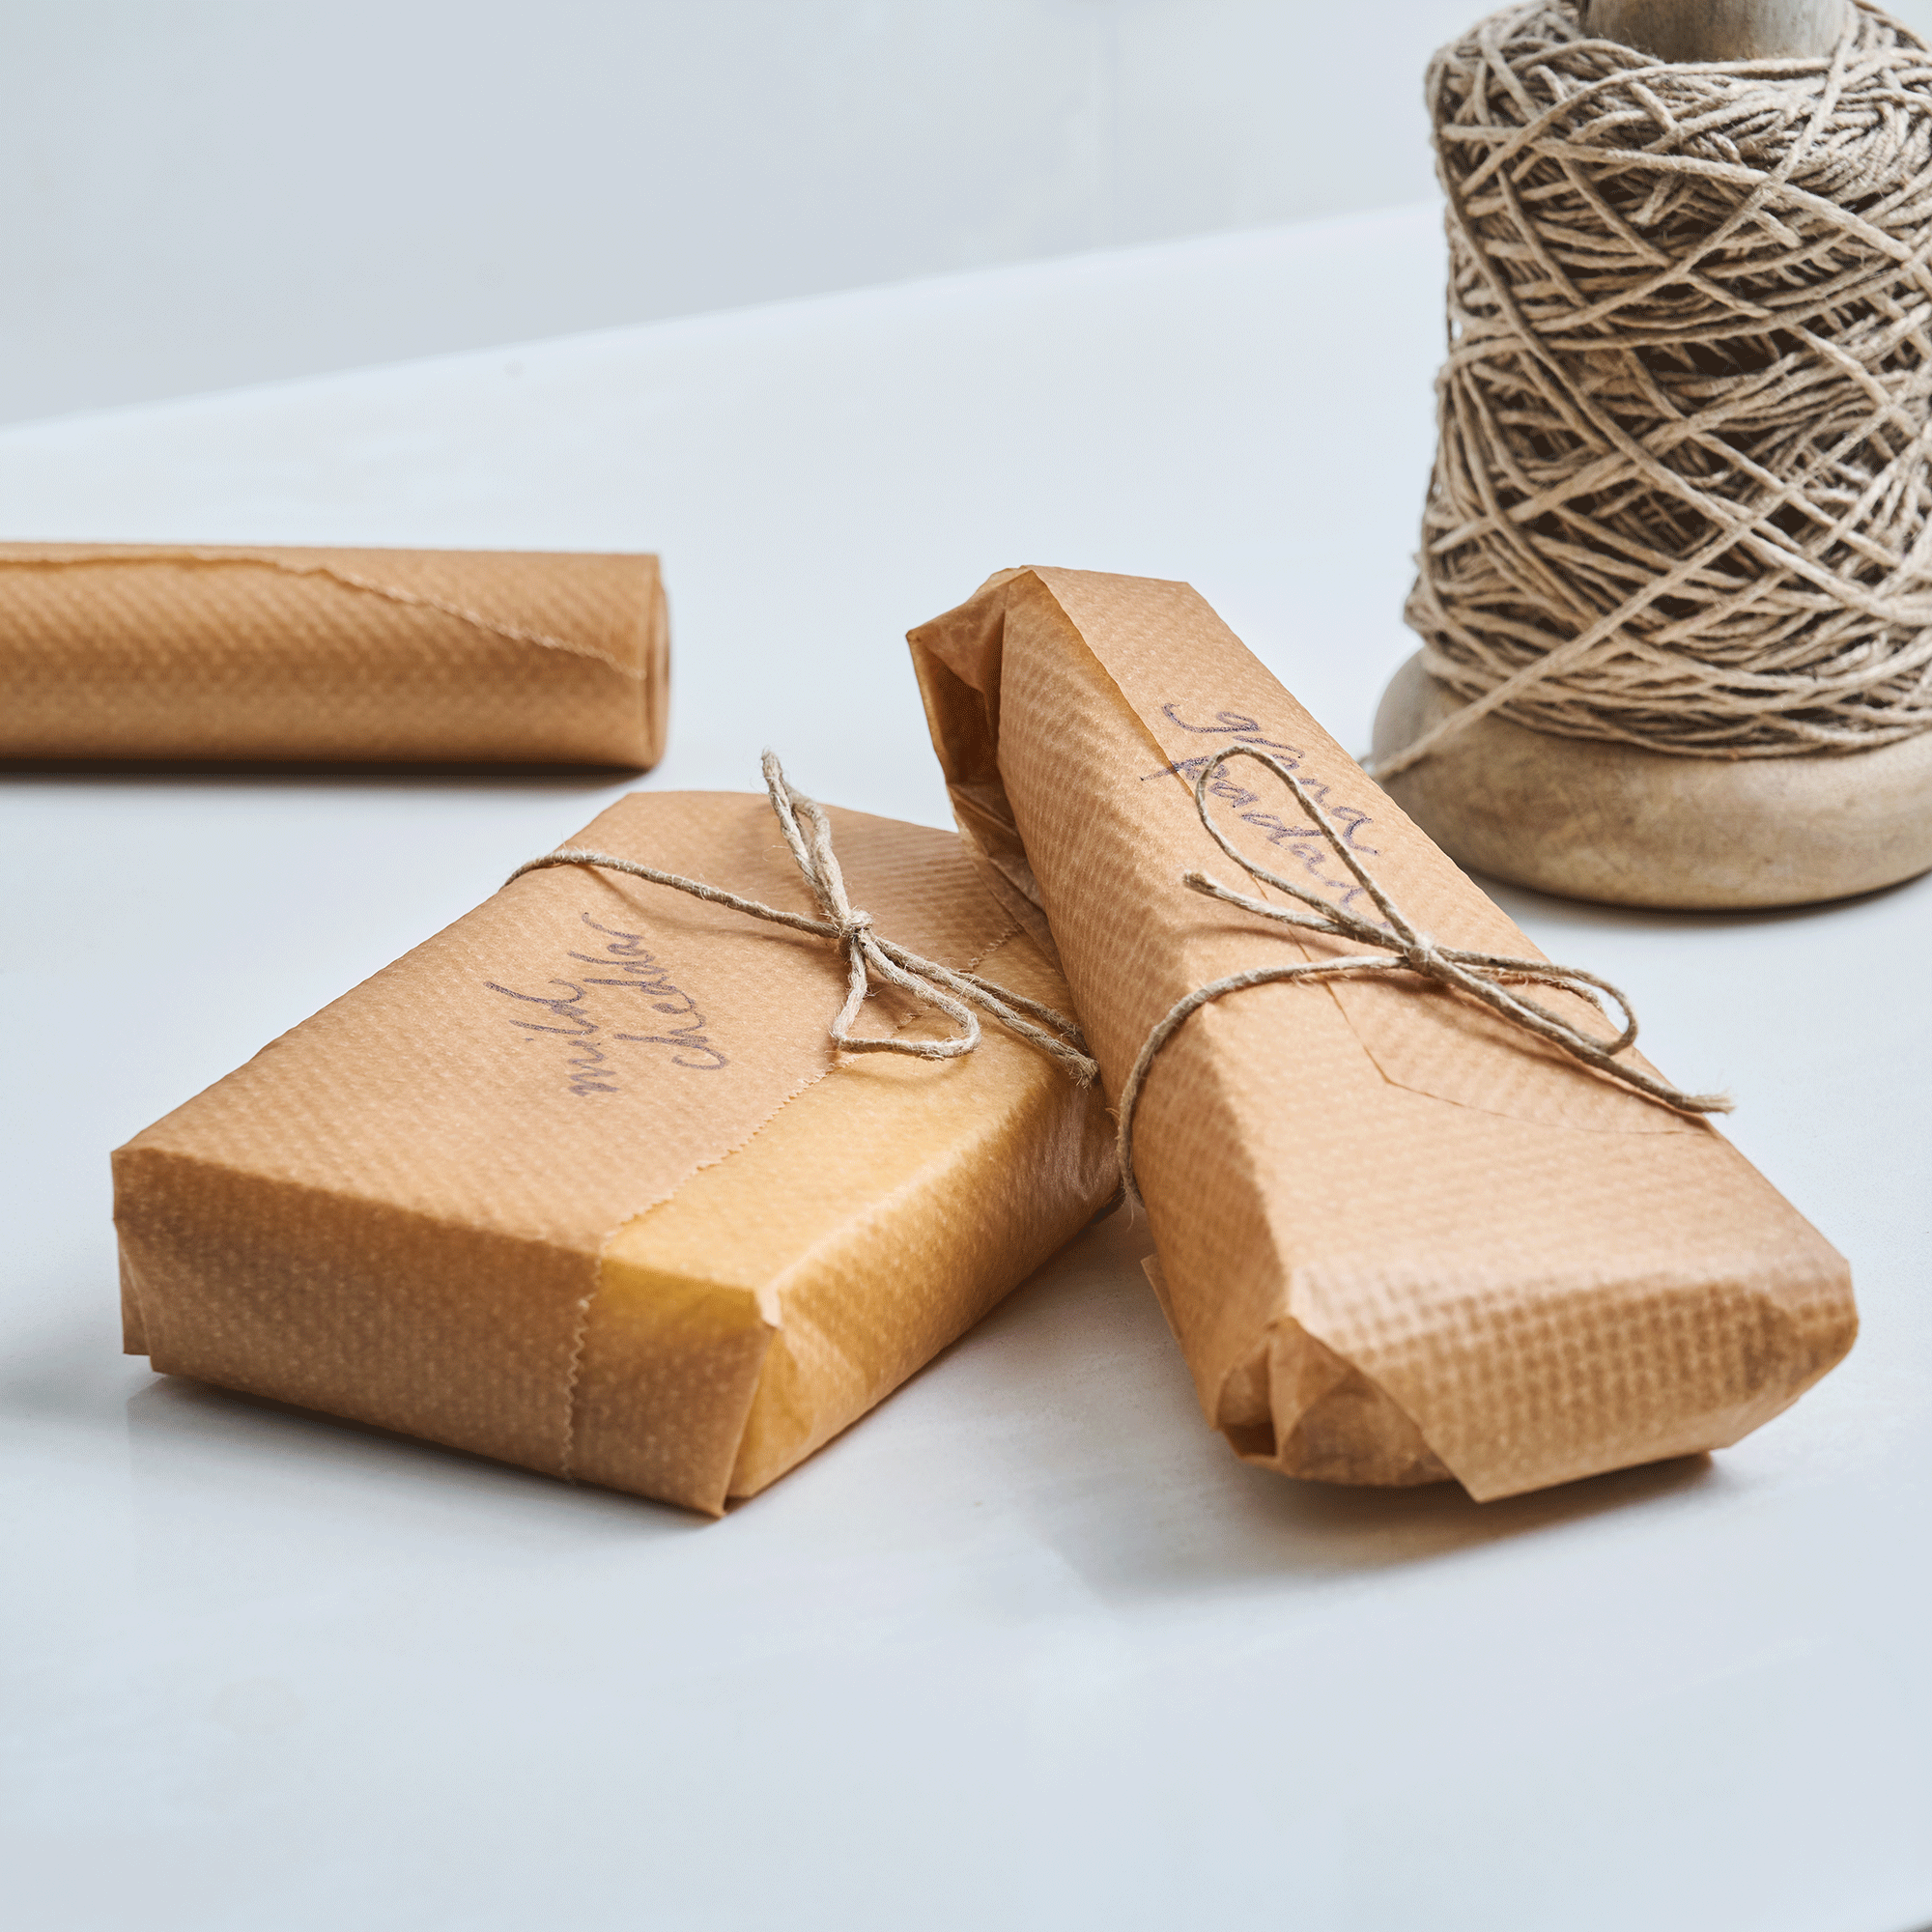 parmesan wrapped in brown paper